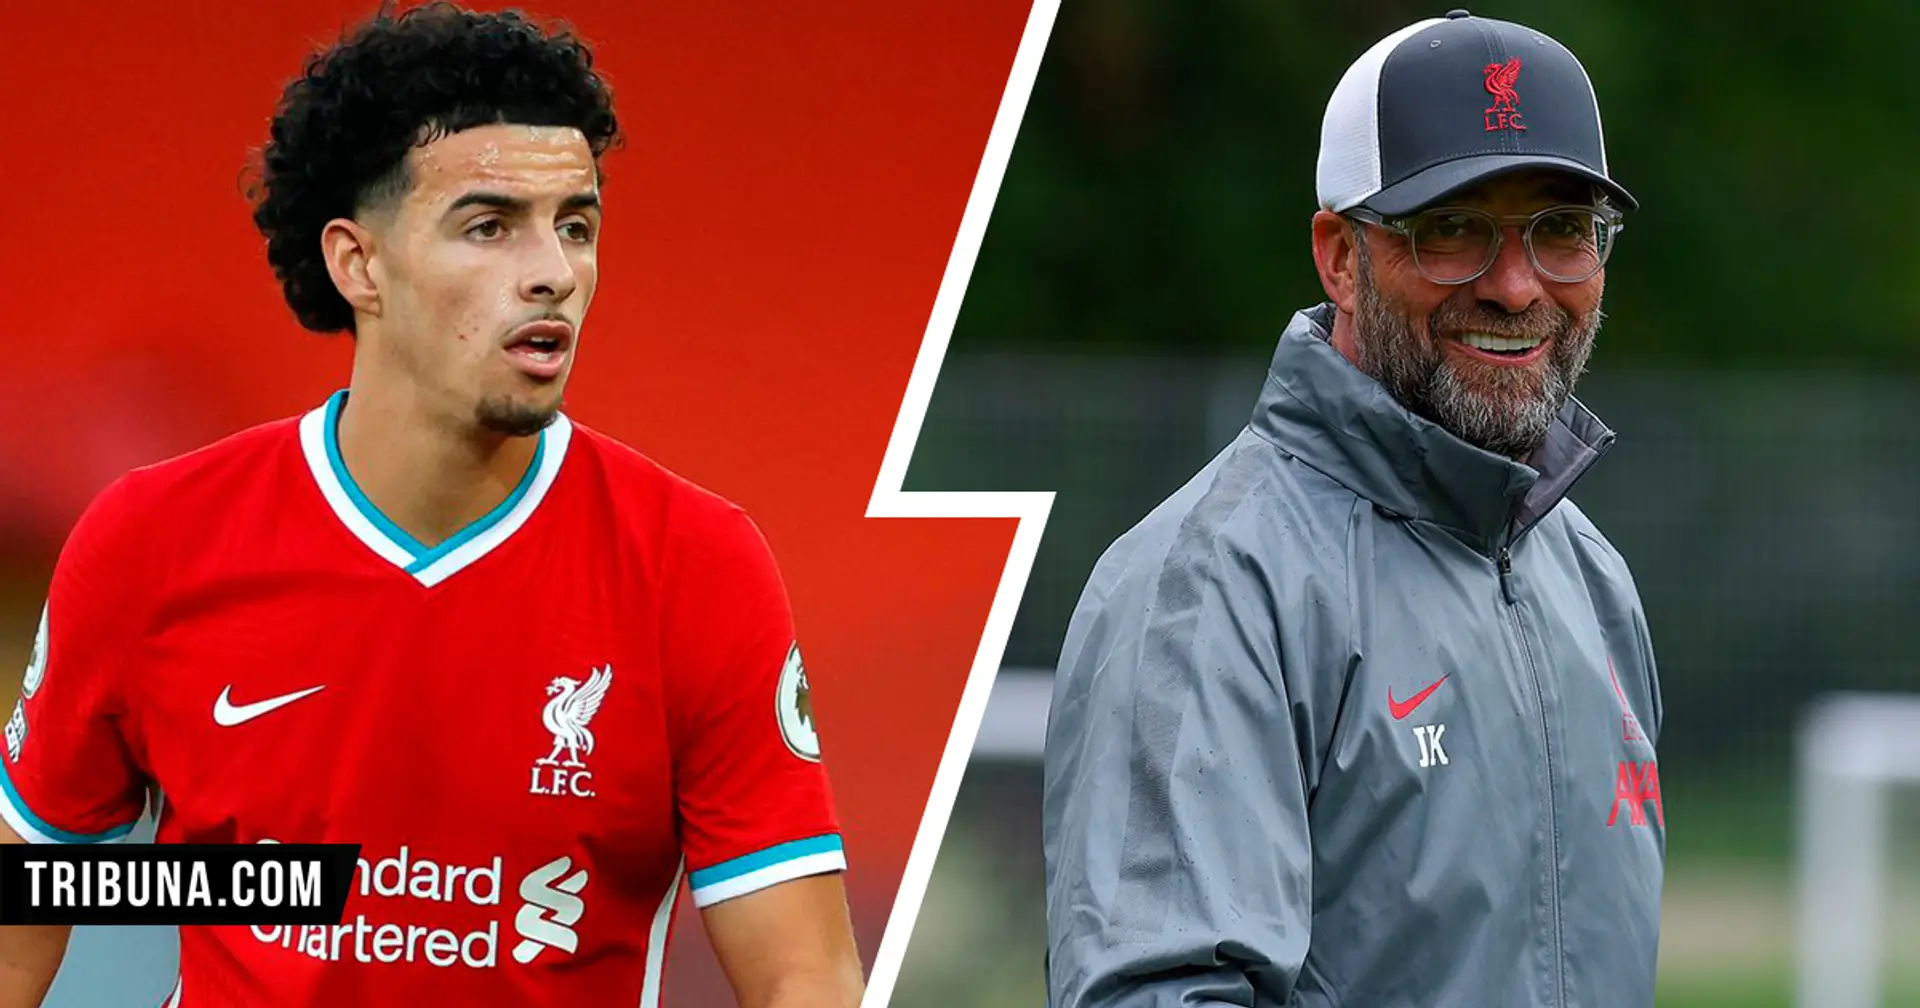 Jurgen Klopp on Curtis Jones: 'The plan is to use him as often as possible because of the way he performs'